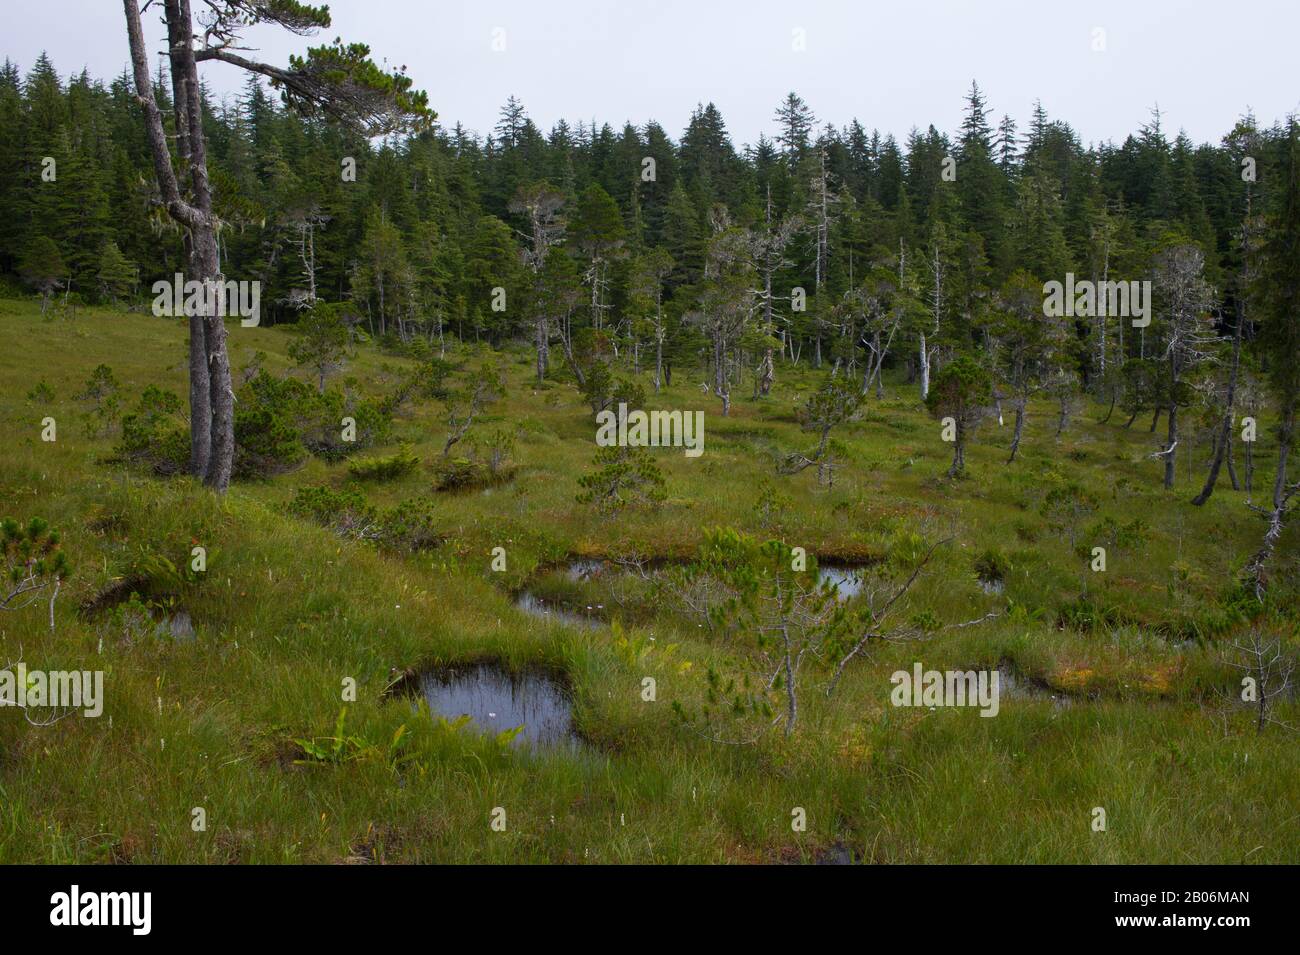 Bog (muskeg) landscape with sphagnum mosses, sedges, and stunted spruce and tamarack trees, at Idaho Inlet on Chichagof Island, Tongass National Fores Stock Photo